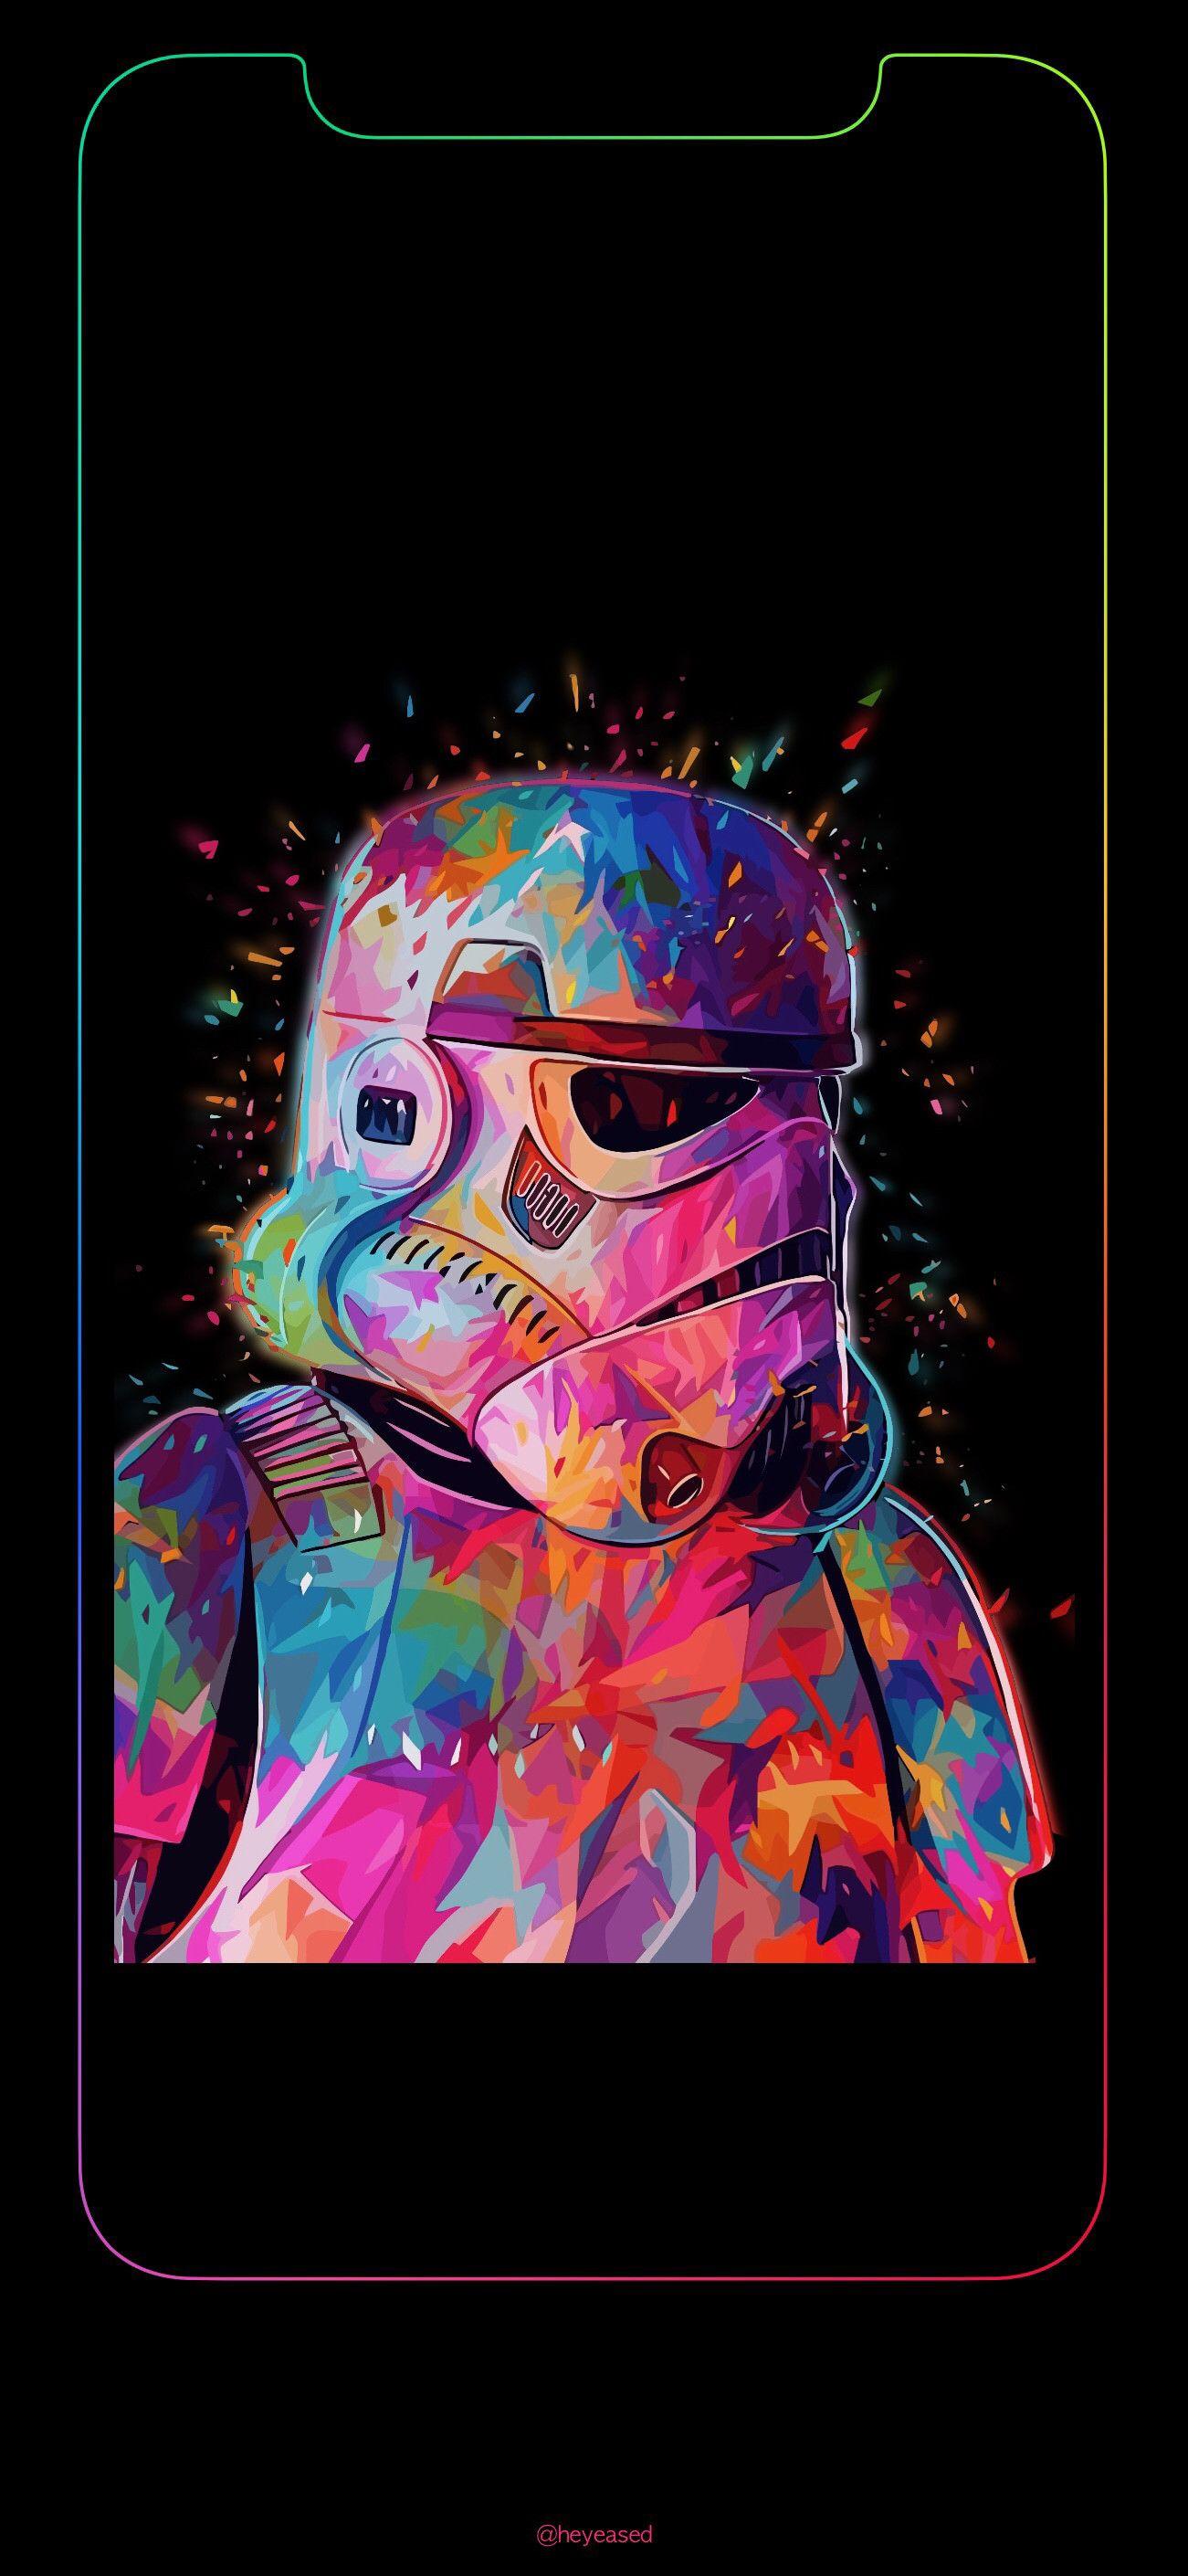 Featured image of post Stormtrooper Wallpaper Hd Iphone Stormtroopers wallpaper 1920px width 1080px height 273 kb for your pc desktop background and mobile phone ipad iphone adroid